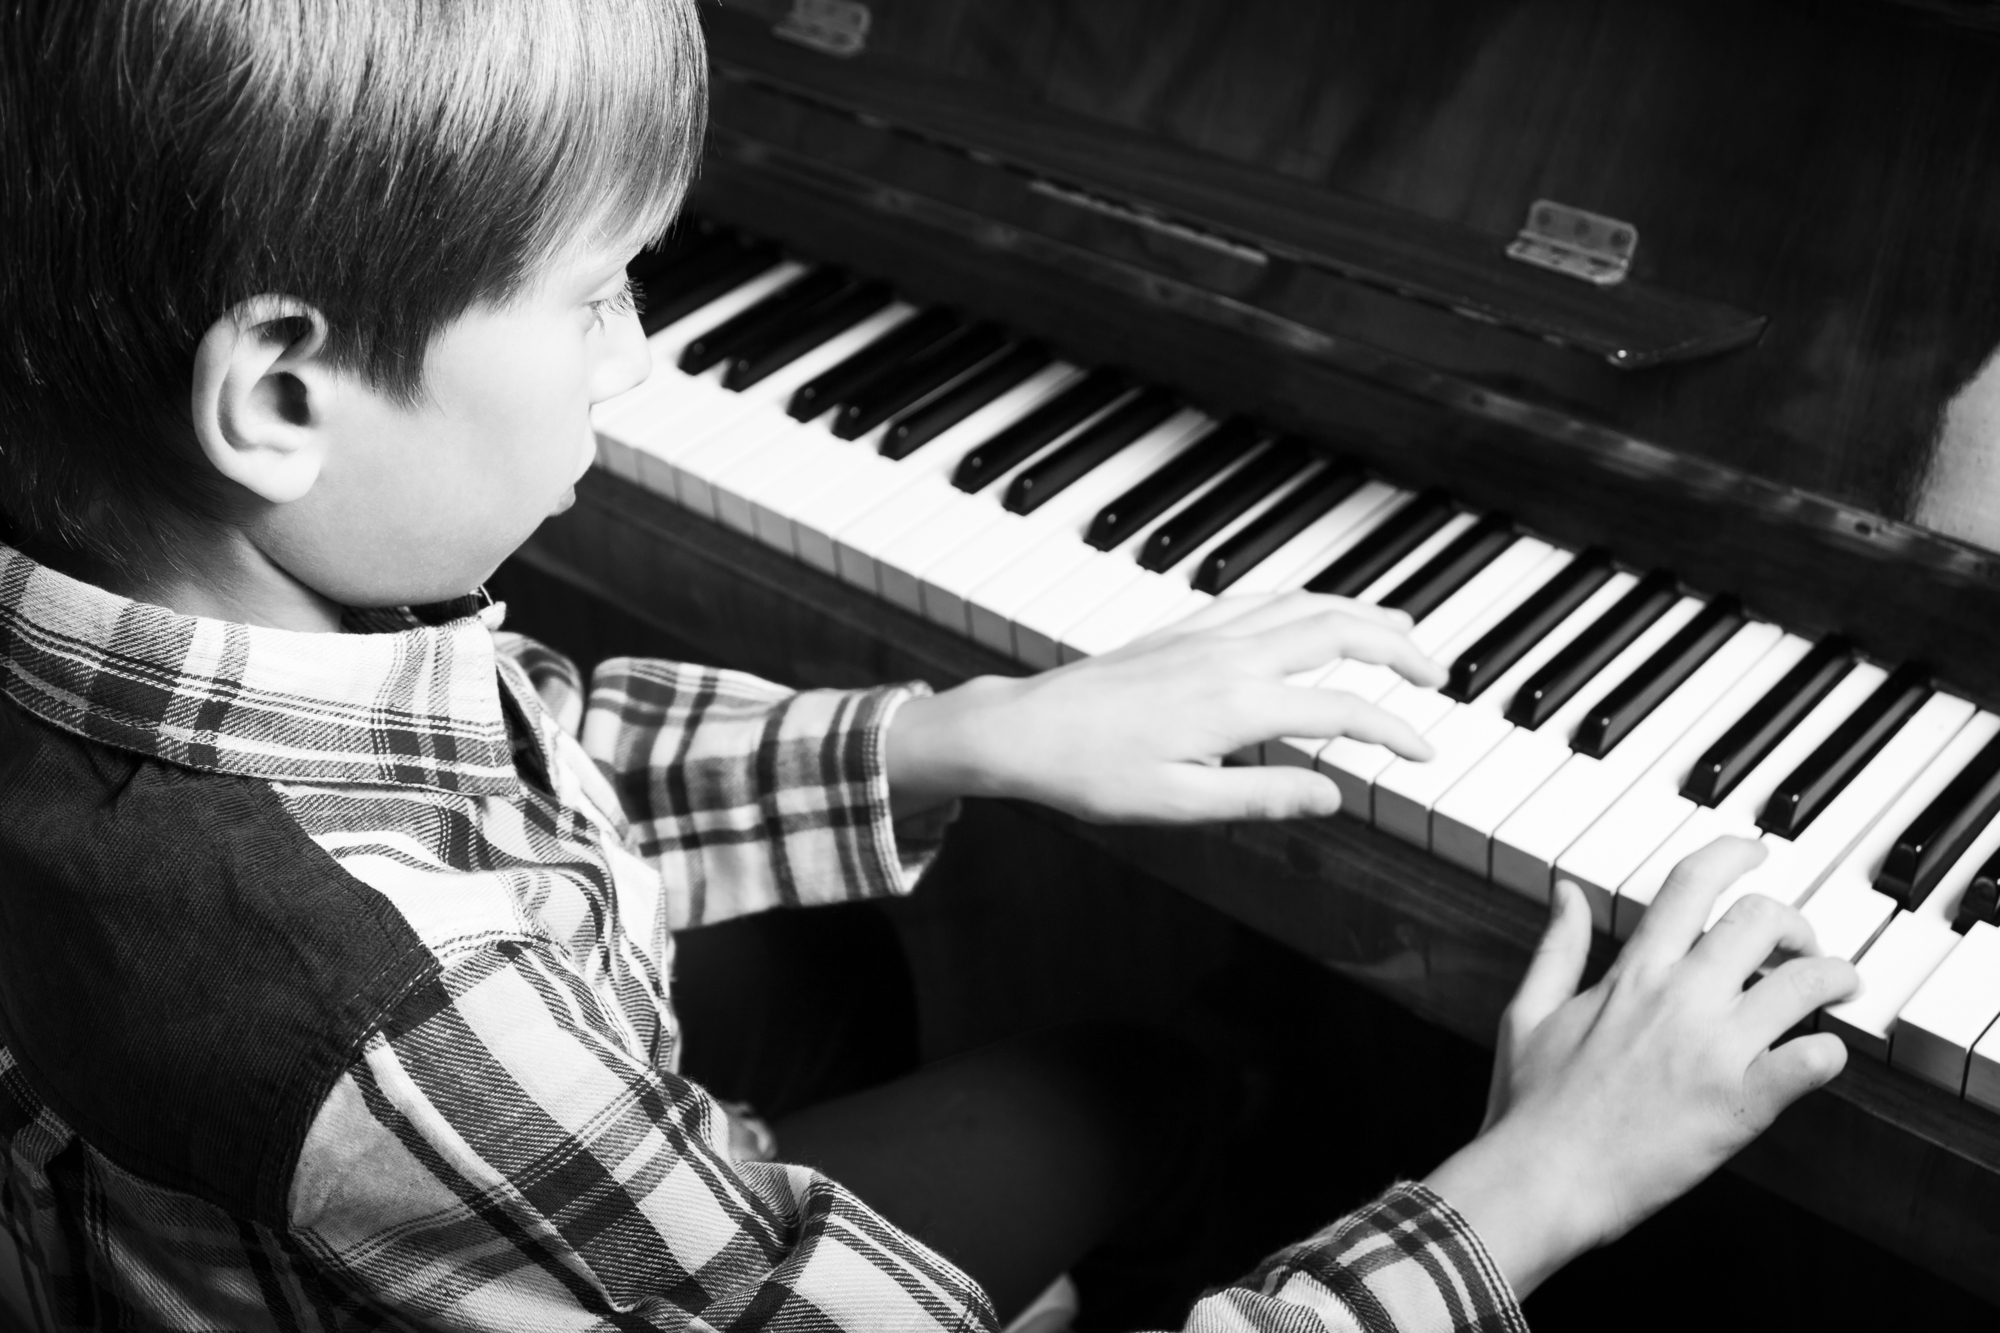 Piano tips to my younger self